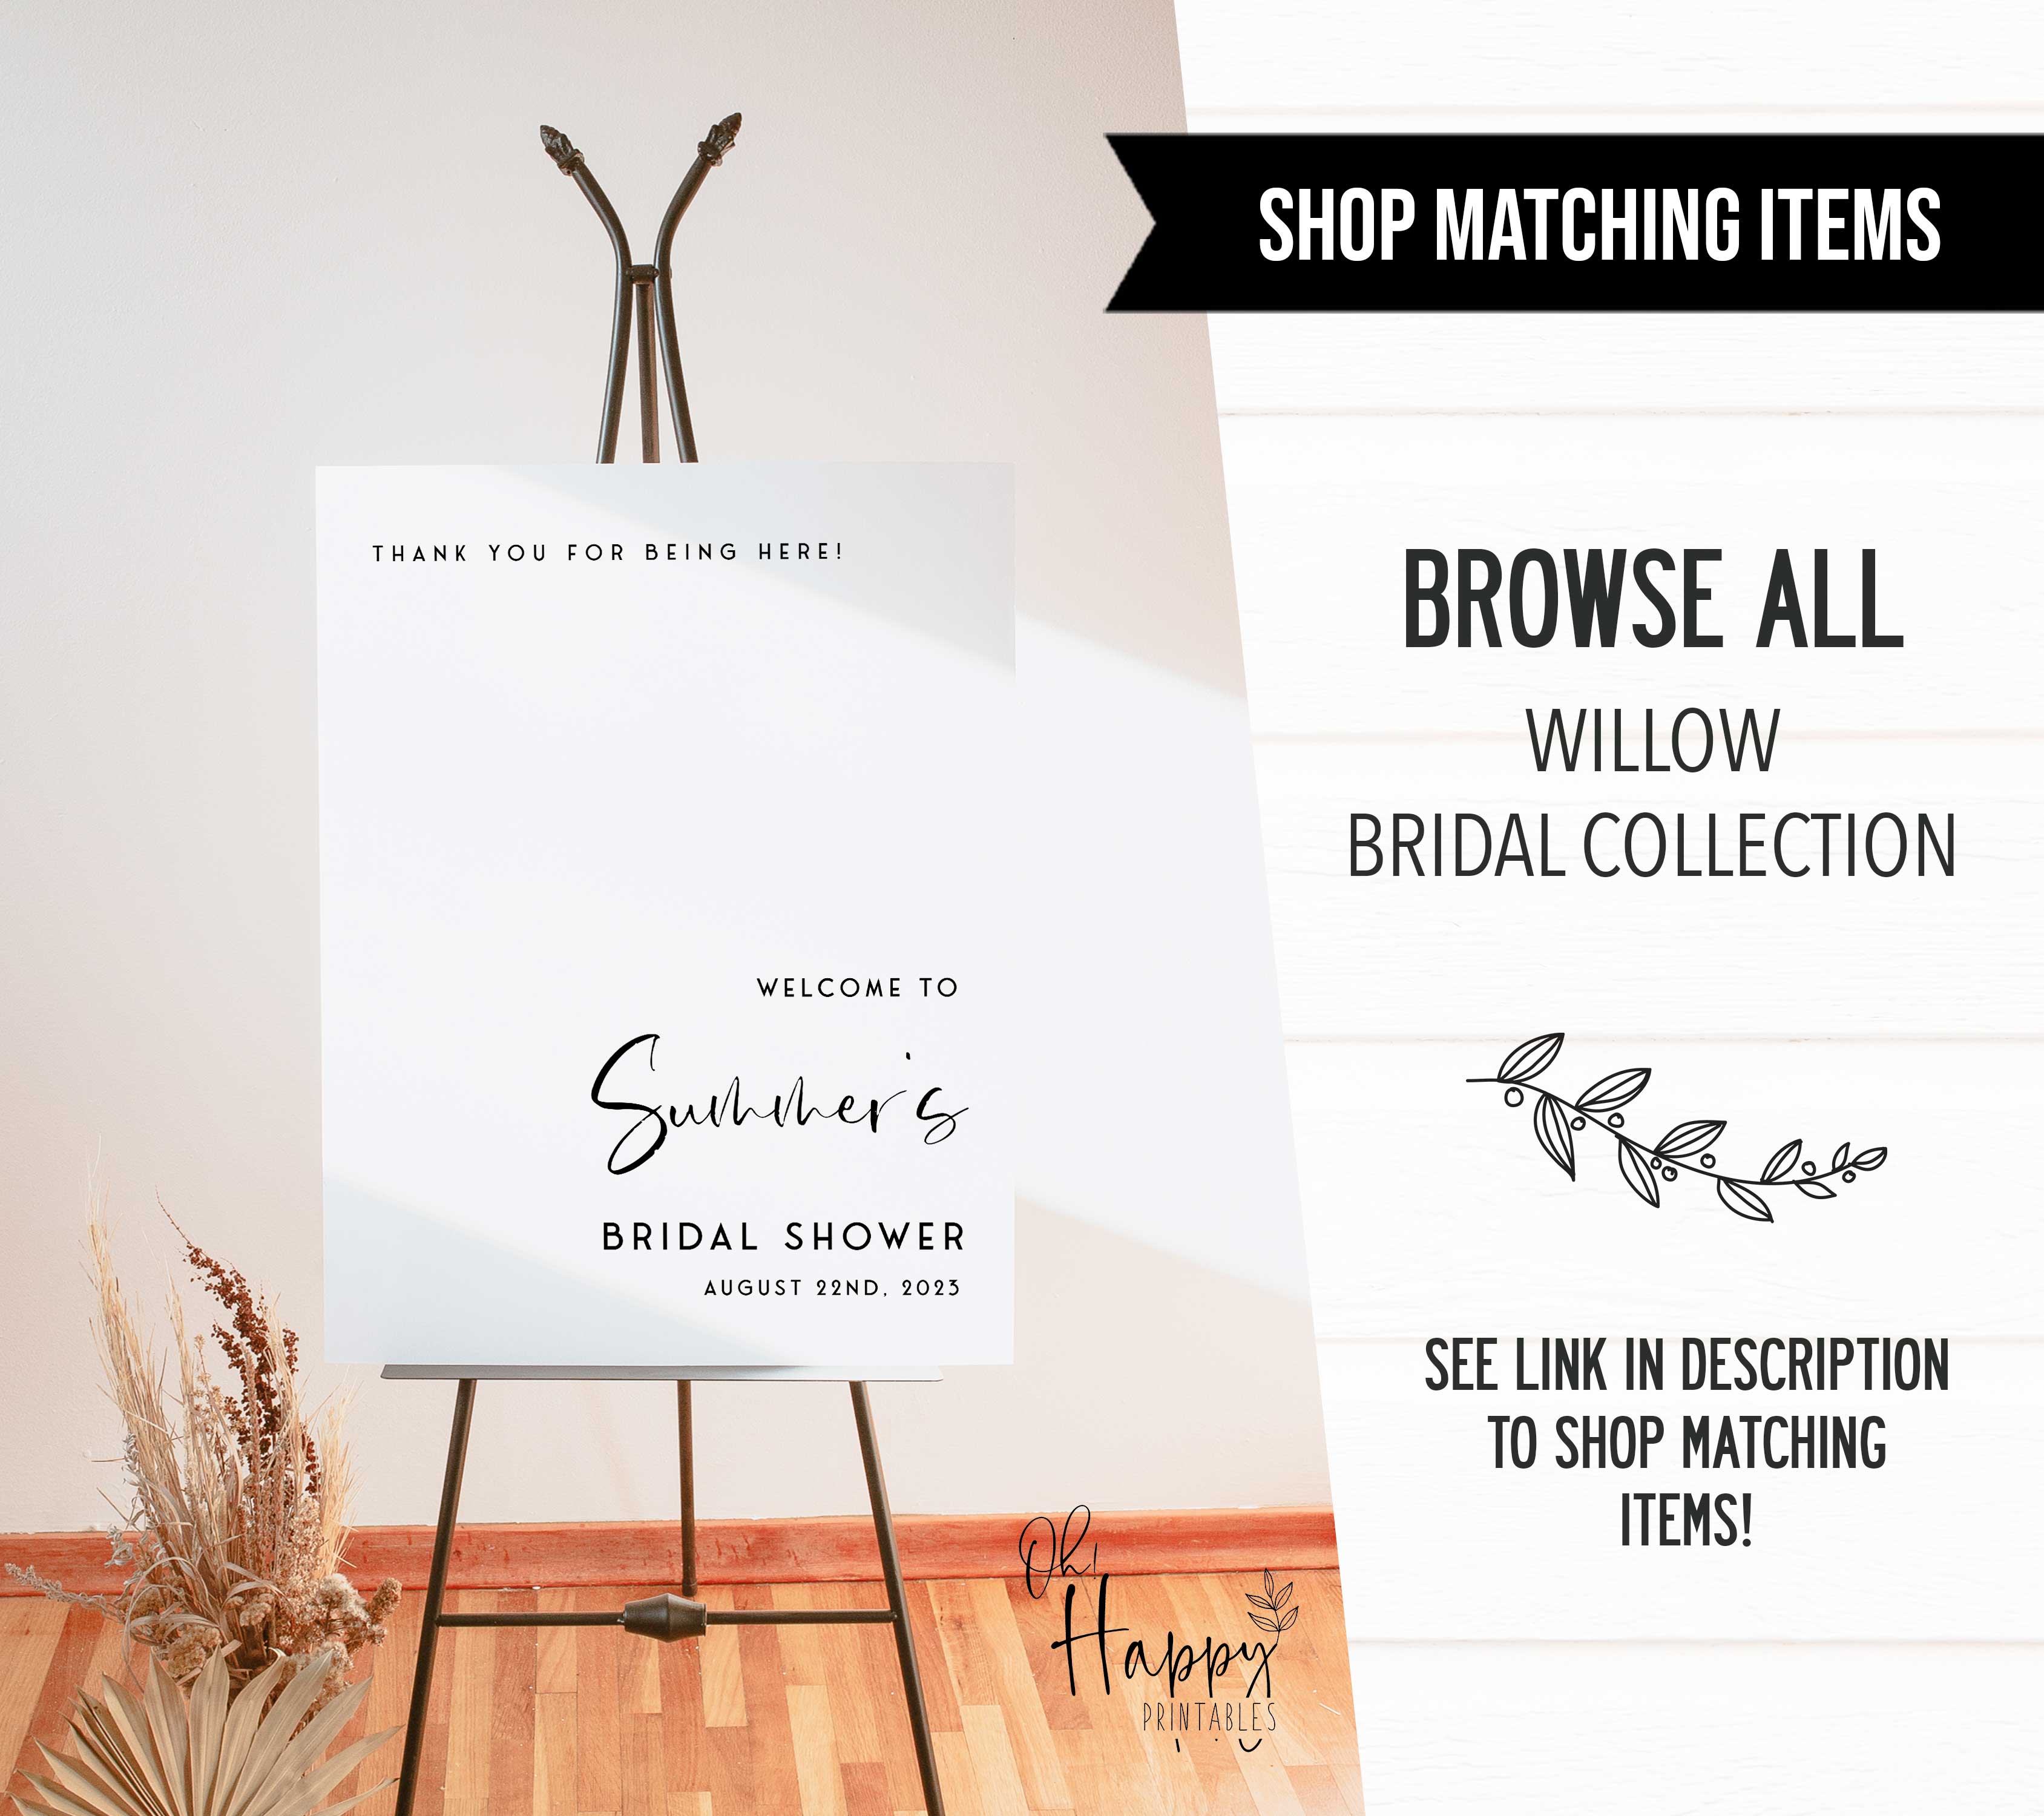 Fully editable and printable bridal shower please take a ring game with a modern minimalist design. Perfect for a modern simple bridal shower themed party